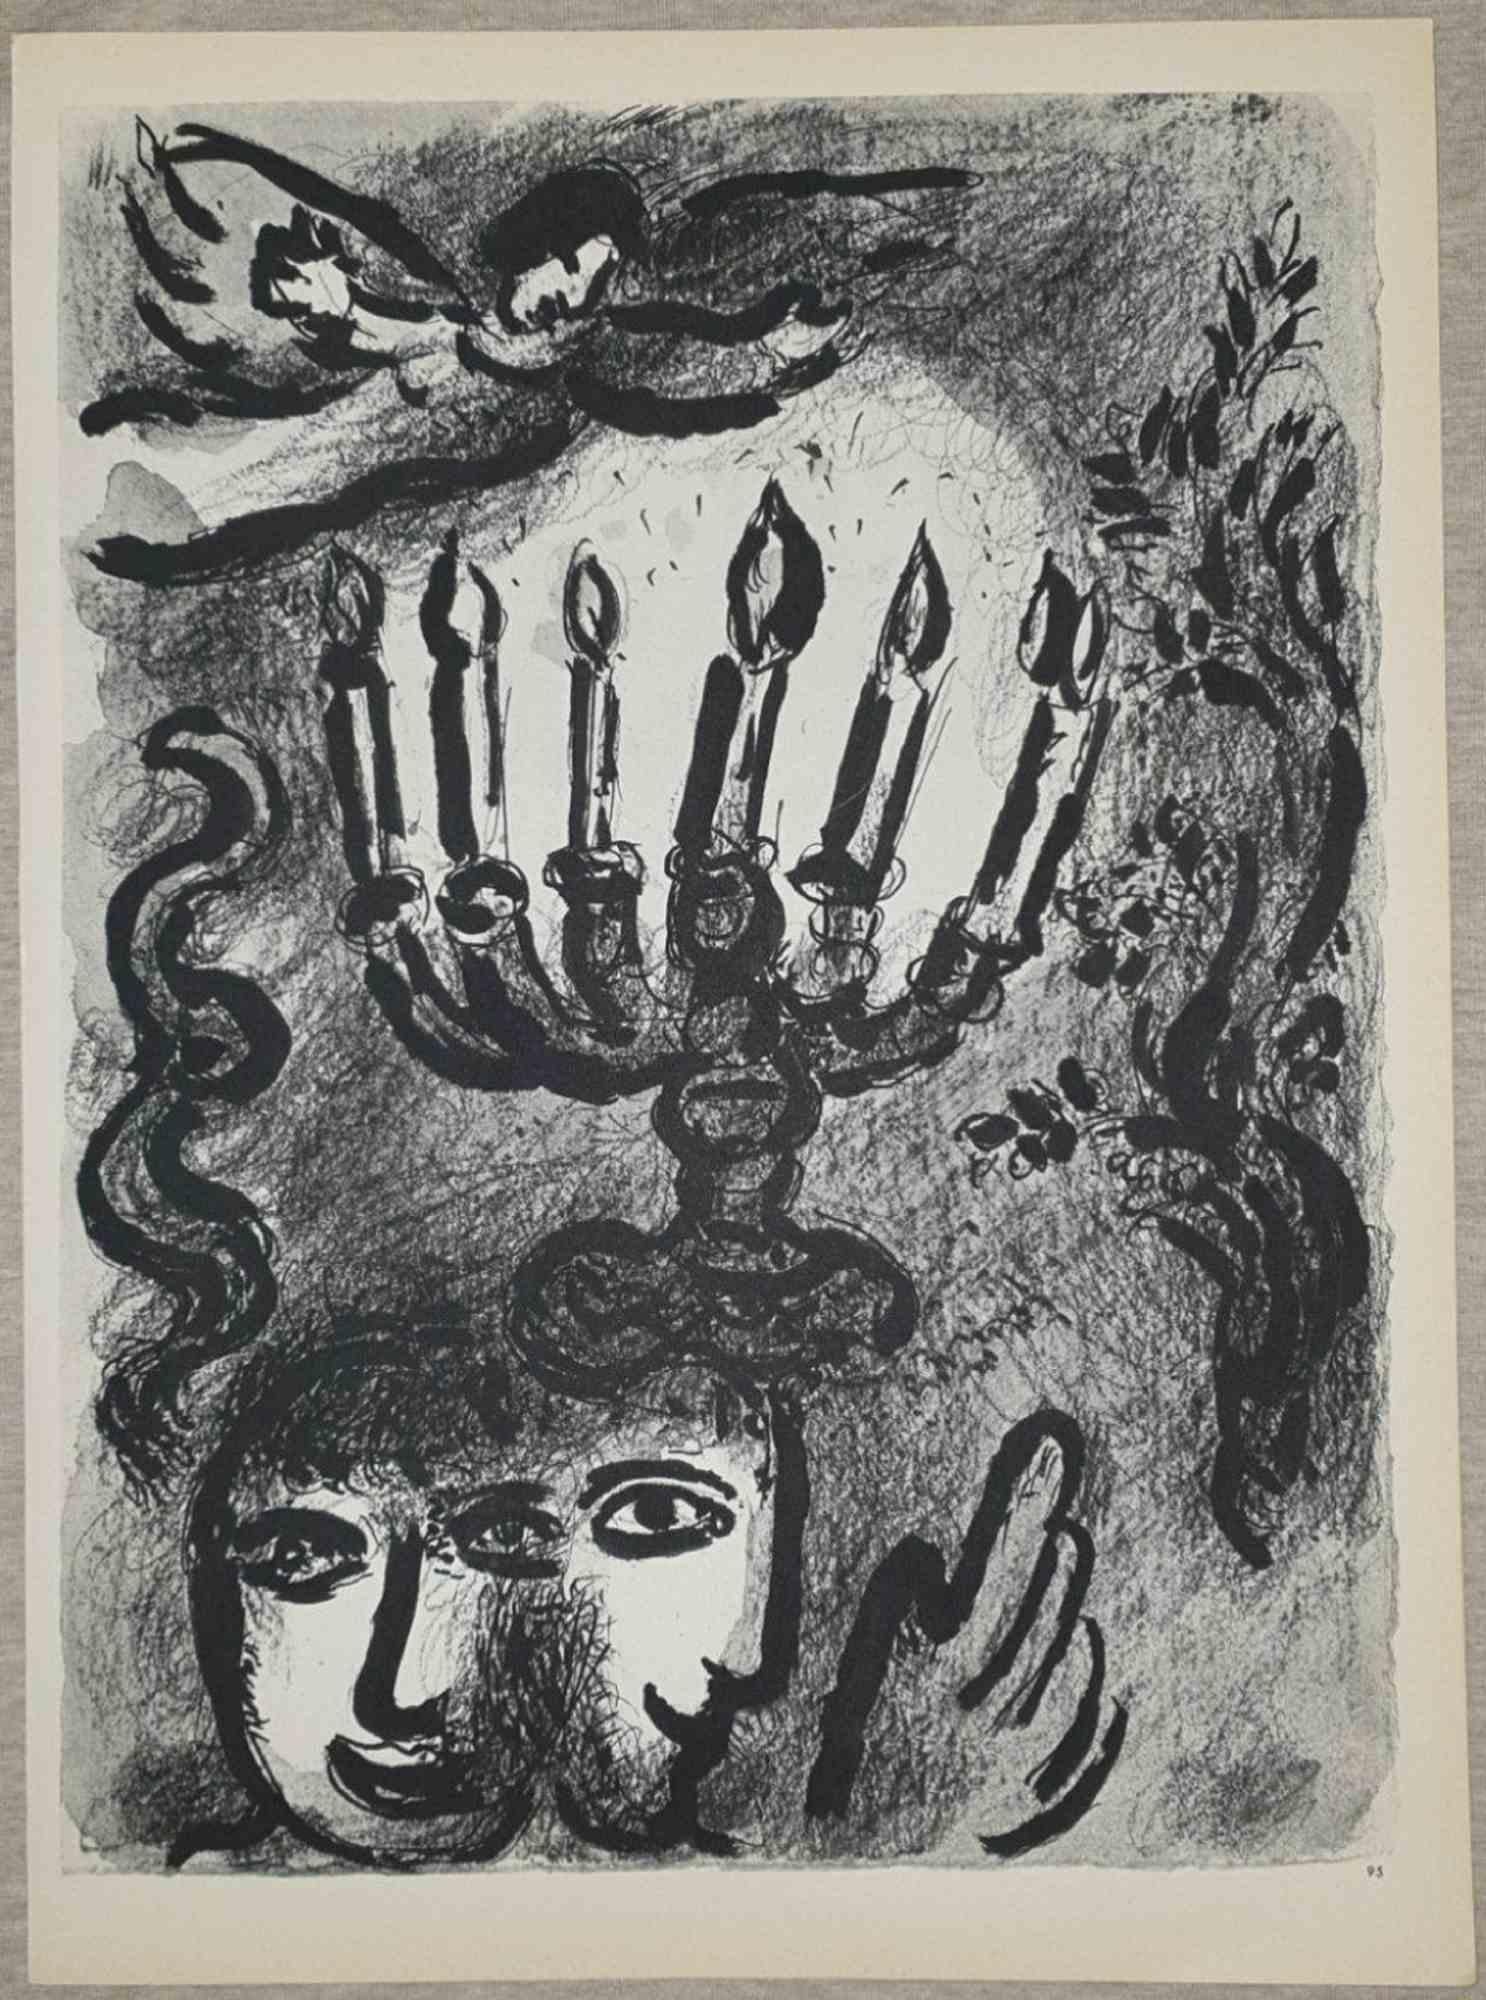 Zechariah's Candlestick  is an artwork realized by March Chagall, 1960s.

Lithograph on brown-toned paper, no signature.

Lithograph on both sides.

Edition of 6500 unsigned lithographs. Printed by Mourlot and published by Tériade, Paris.

Ref.